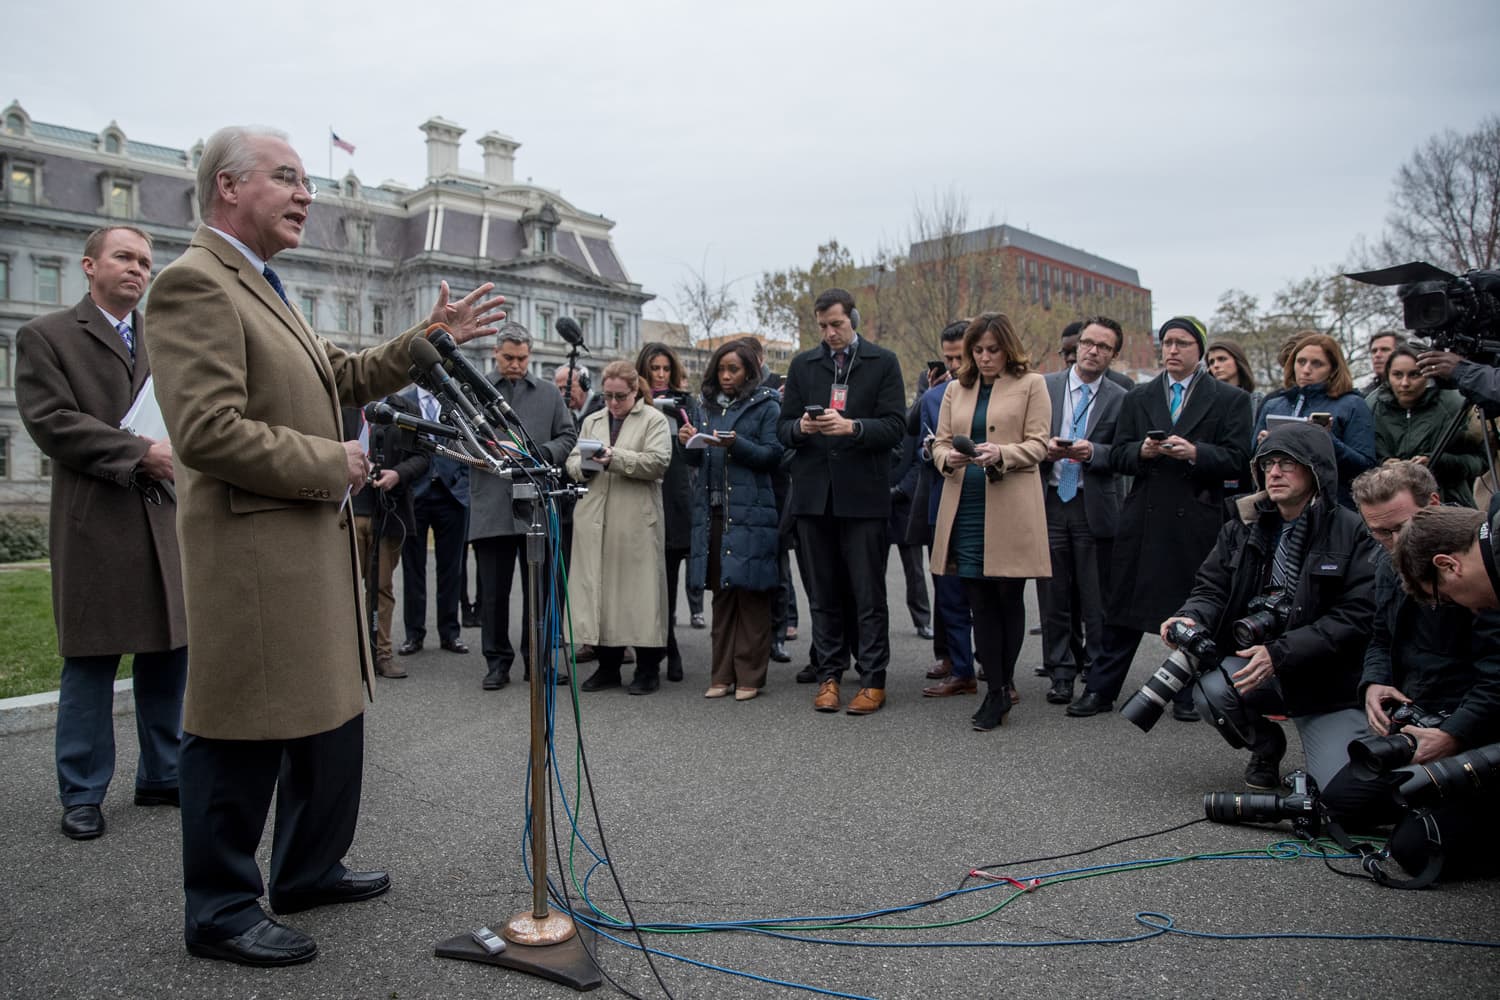 Health and Human Services Secretary Tom Price, accompanied by Budget Director Mick Mulvaney, left, speaks outside the West Wing of the White House in Washington. (Andrew Harnik/AP)